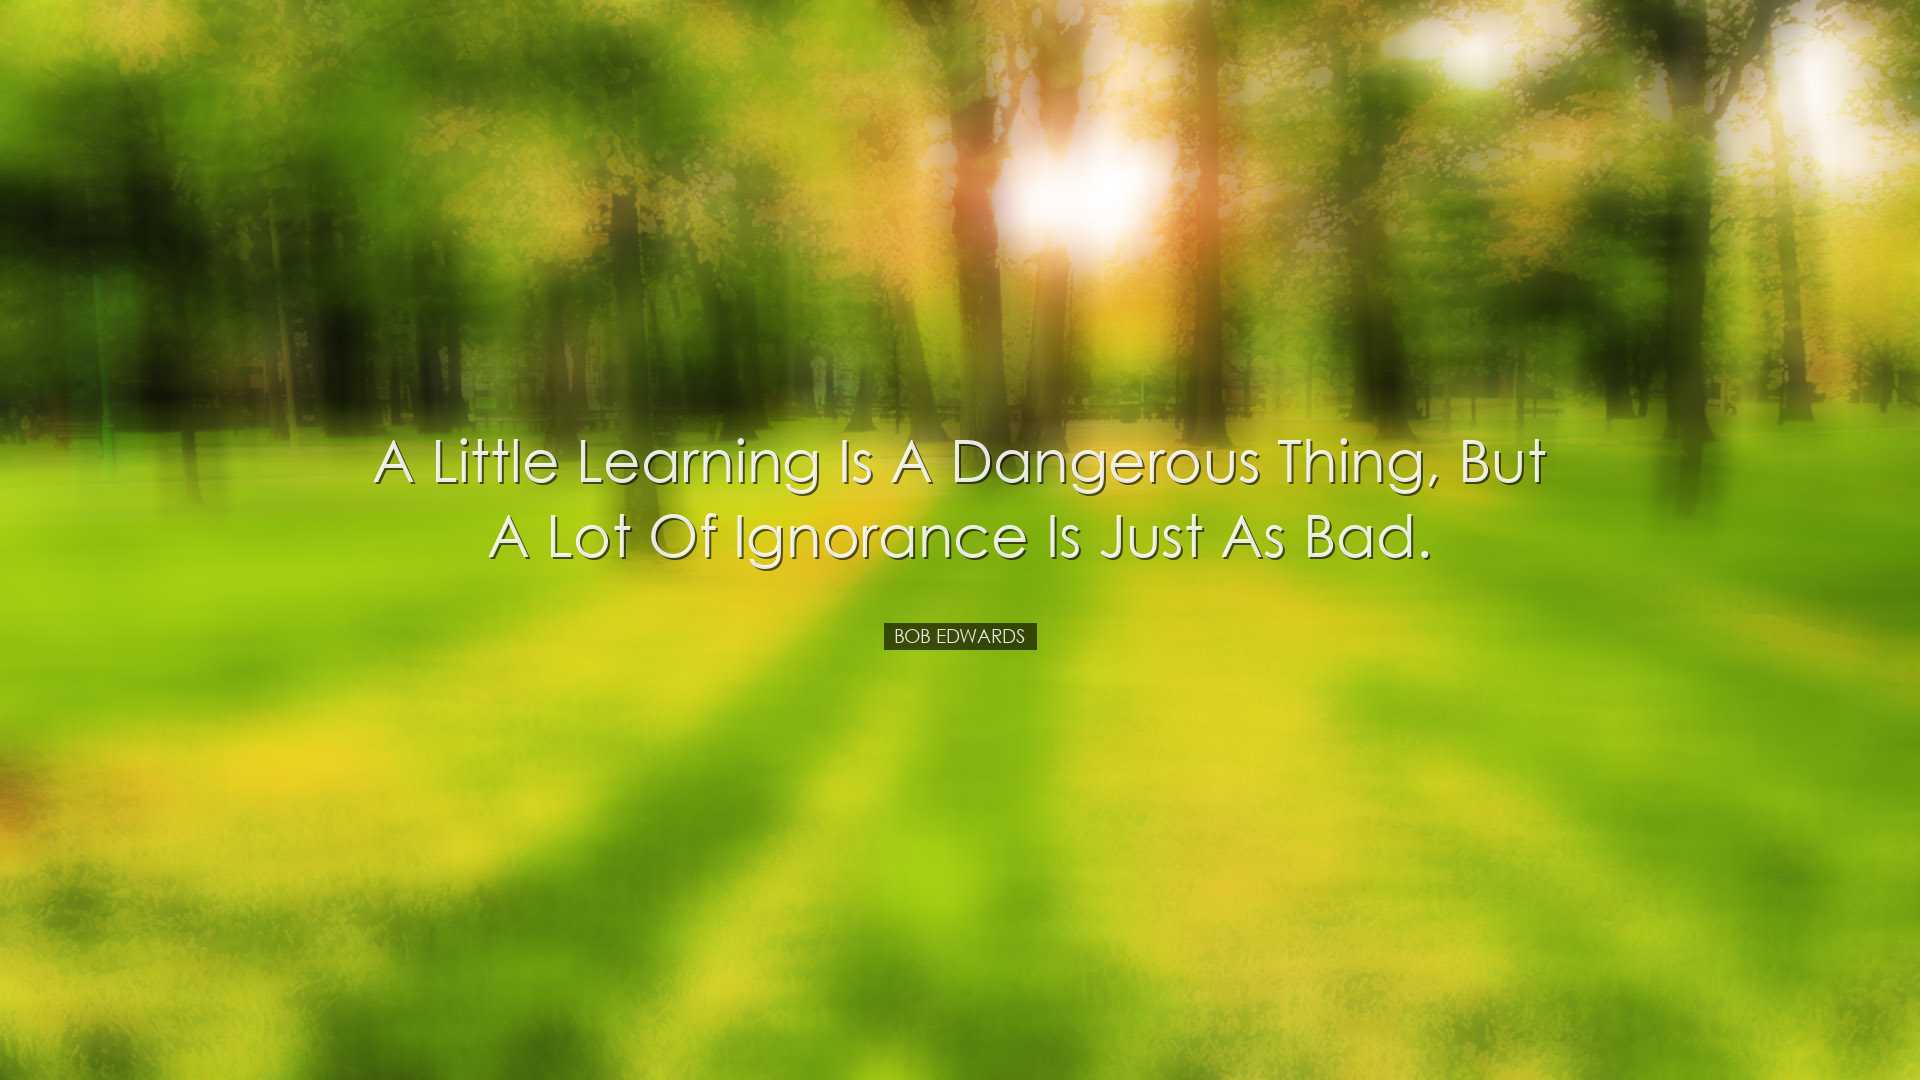 A little learning is a dangerous thing, but a lot of ignorance is